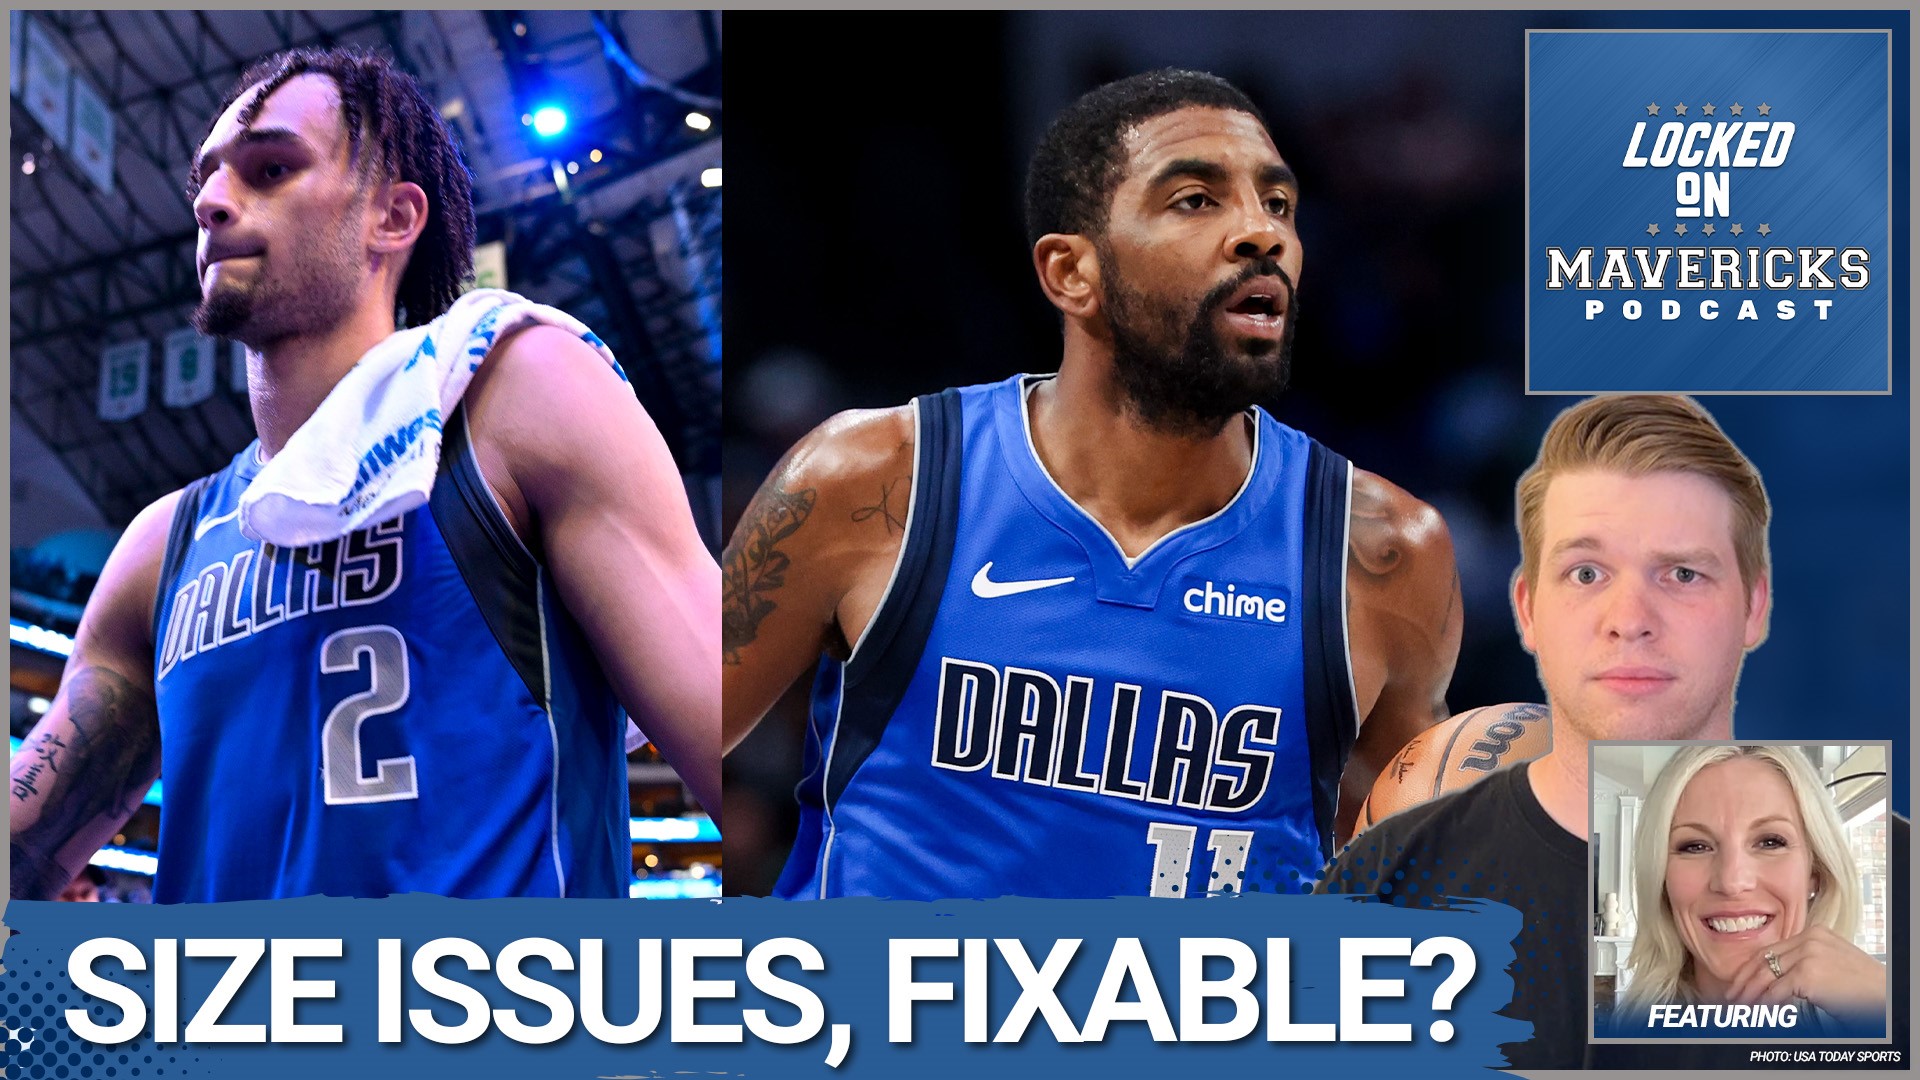 Nick Angstadt & Dana Larson discuss the Dallas Mavericks size issues, Kyrie Irving's ramping up, if the Starting Lineup works, and more.